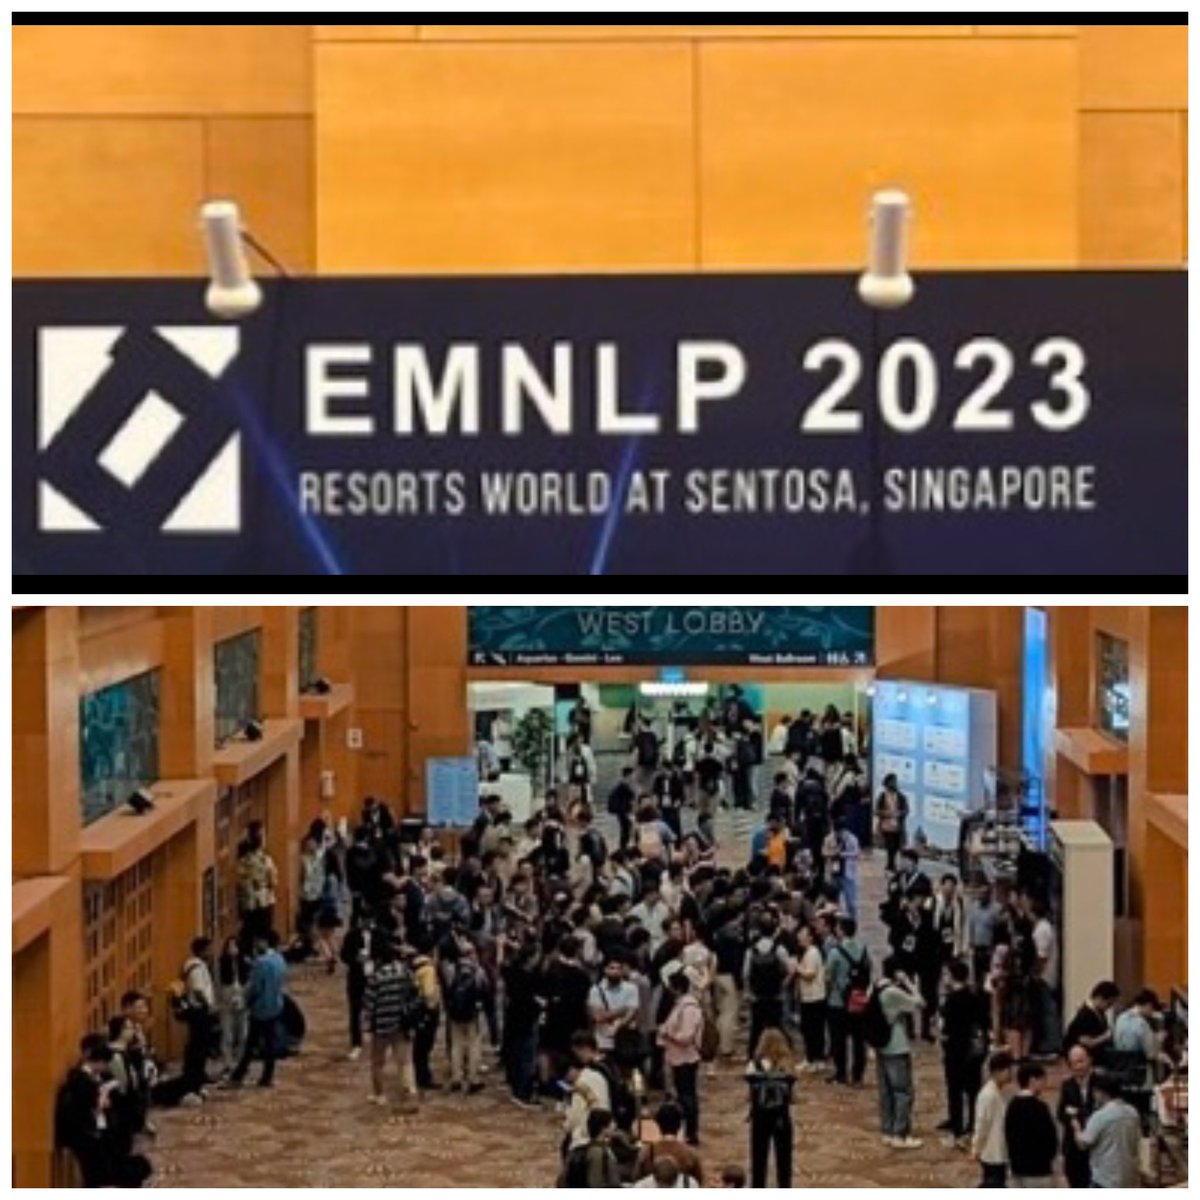 And it’s a wrap! Thank-you all for making the conference enjoyable and being gracious about the little slip-ups along the way. Hope everyone had a good time and good conversations at #EMNLP2023 The PC Chairs are signing off now! 😊 @juanmiguelpino @hbouamor @emnlpmeeting